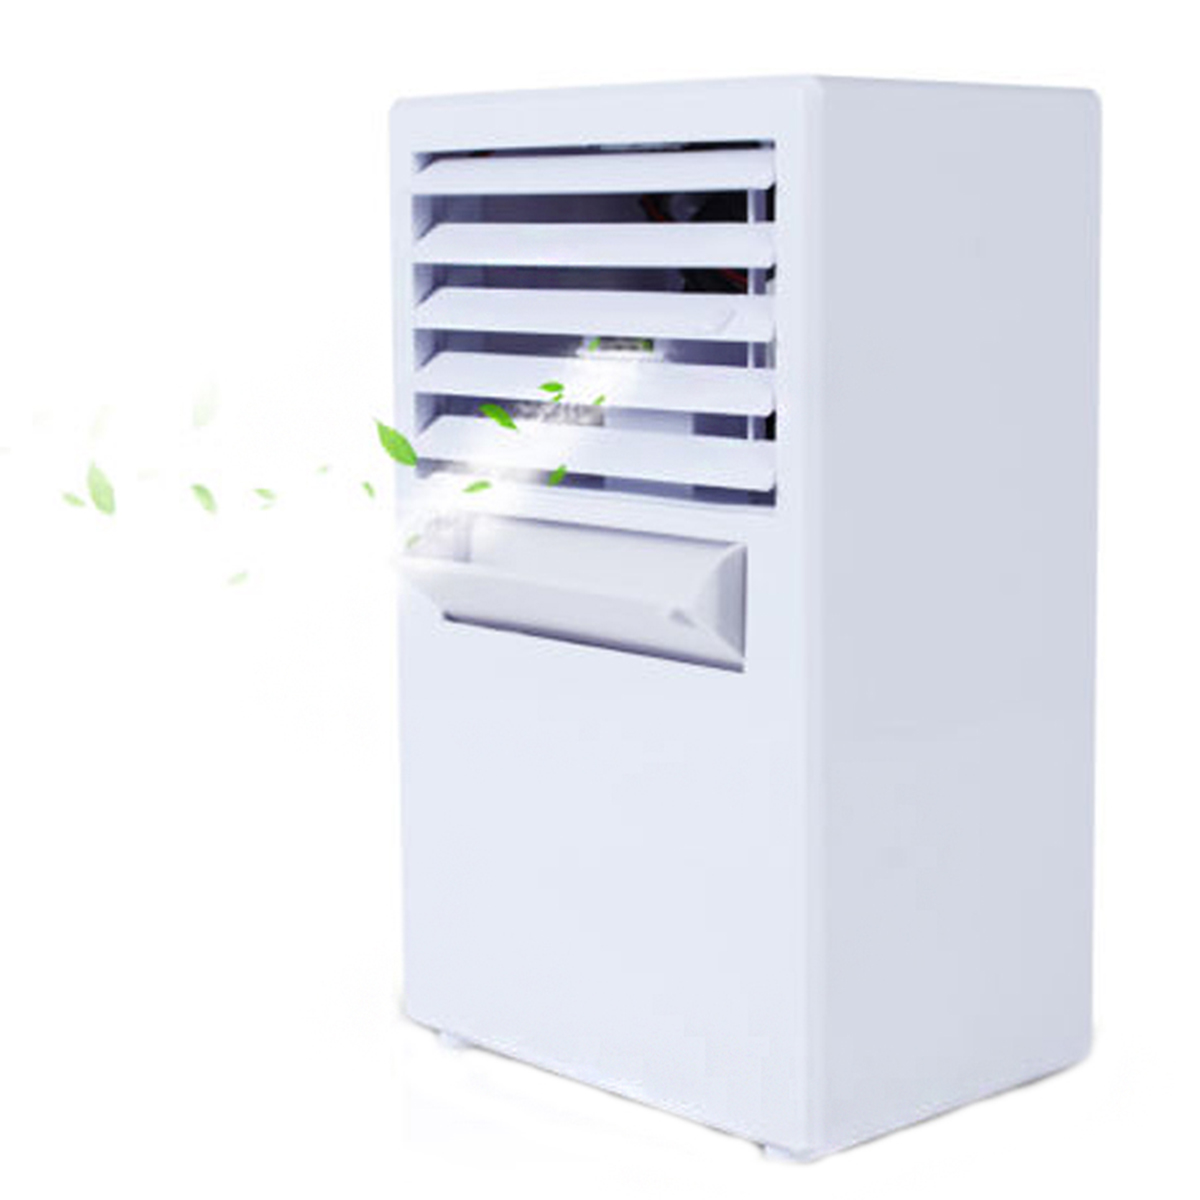 24W-24V-Portable-Air-Conditioning-Fan-Low-Noise-3-Wind-Speeds-Cooler-Digitals-Cooling-System-Timing--1710103-4